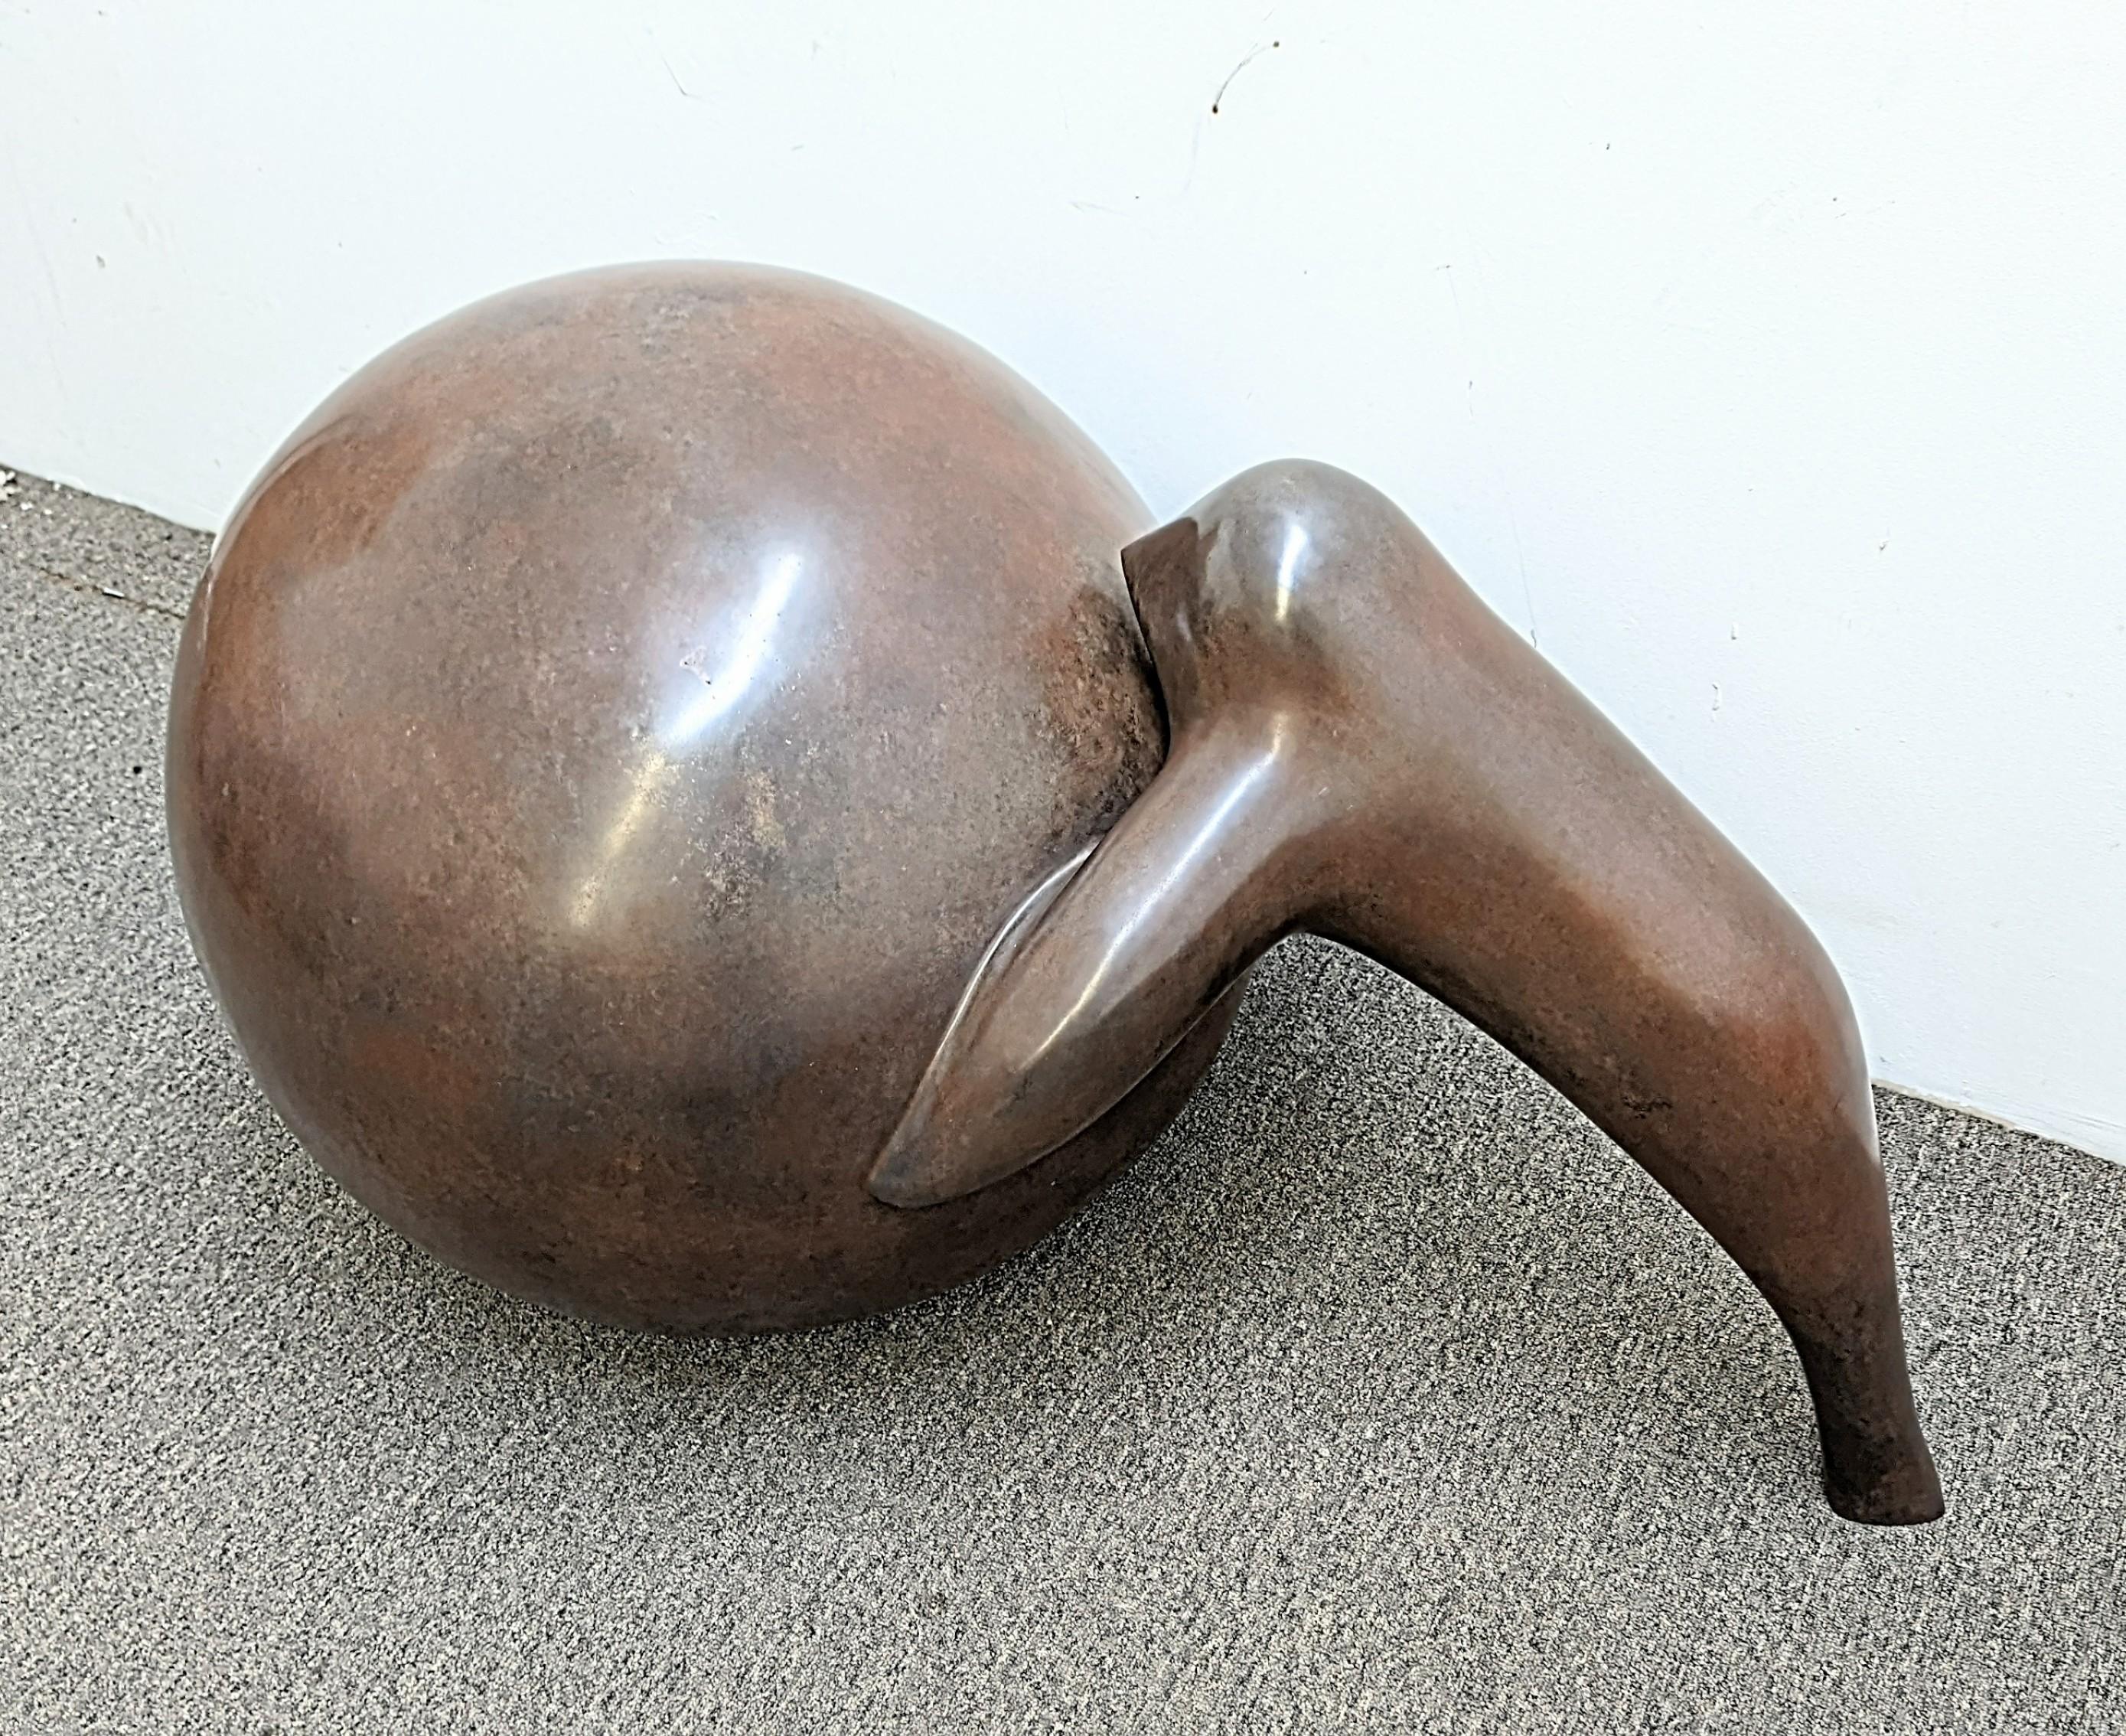 Artist: Joel Fisher, American (1947 - ) - Title: Baby Seal w./ball - Year: 1994 - Medium: Bronze Sculpture. Signature and number inscribed - Edition: A.P. 1/5 - Size: 25.5 in. x 48 in. x 28.5 in.